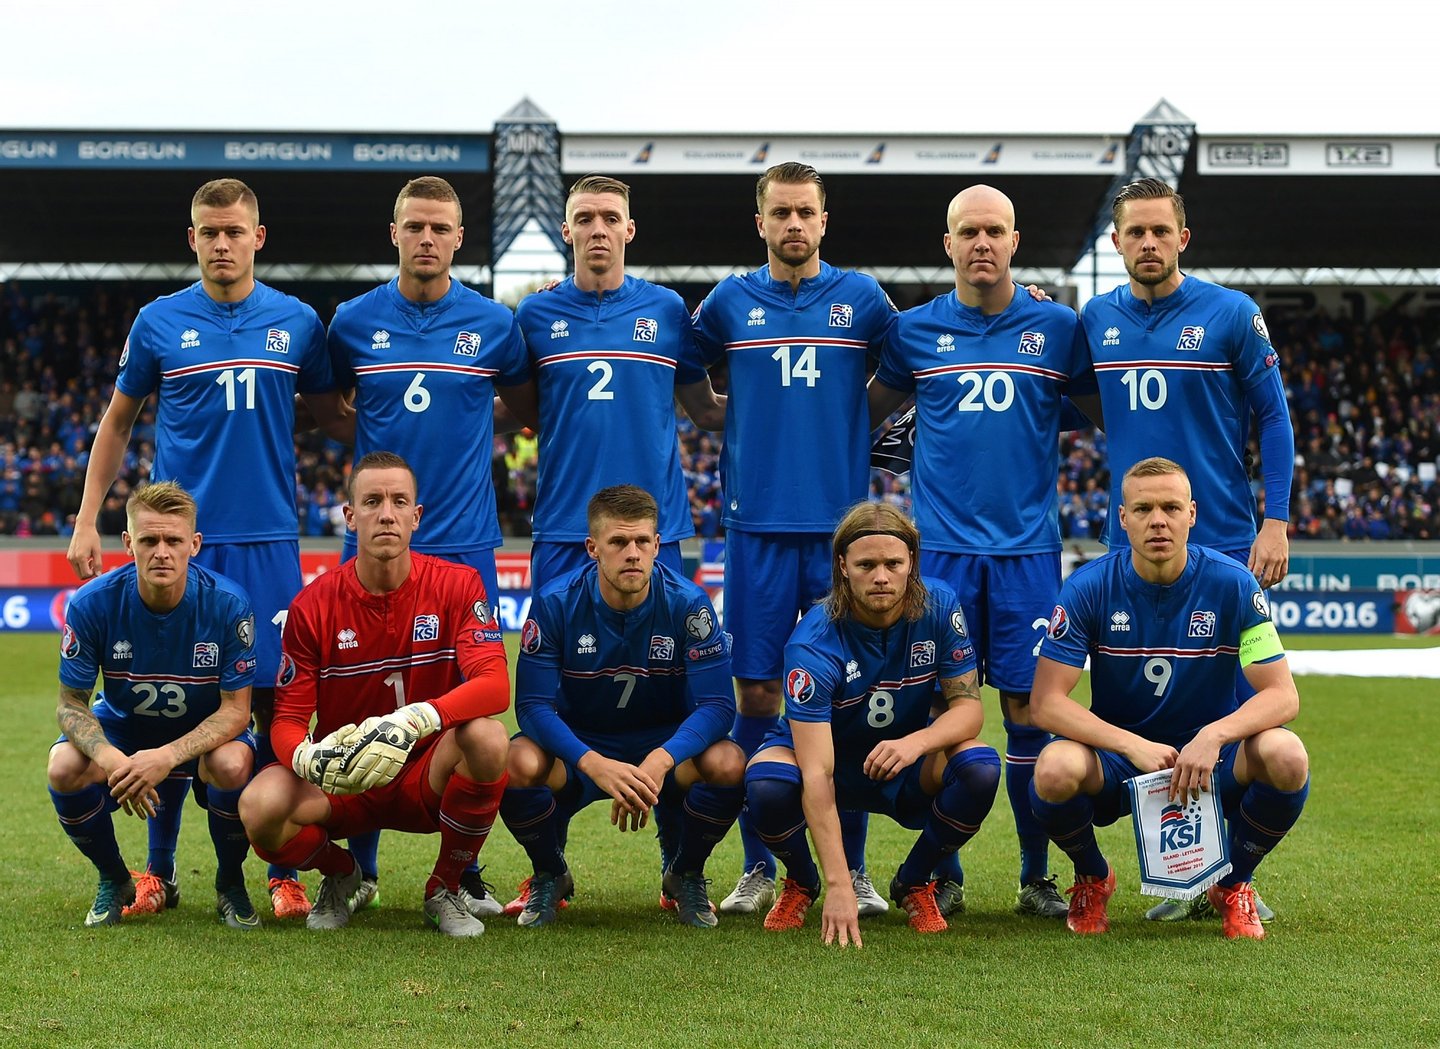 REYKJAVIK, ICELAND - OCTOBER 10: Players of Iceland pose for a photograph during the UEFA EURO 2016 Qualifier match between Iceland and Latvia at Laugardalsvollur National Stadium on October 10, 2015 in Reykjavik, Iceland. (Photo by Tom Dulat/Getty Images).